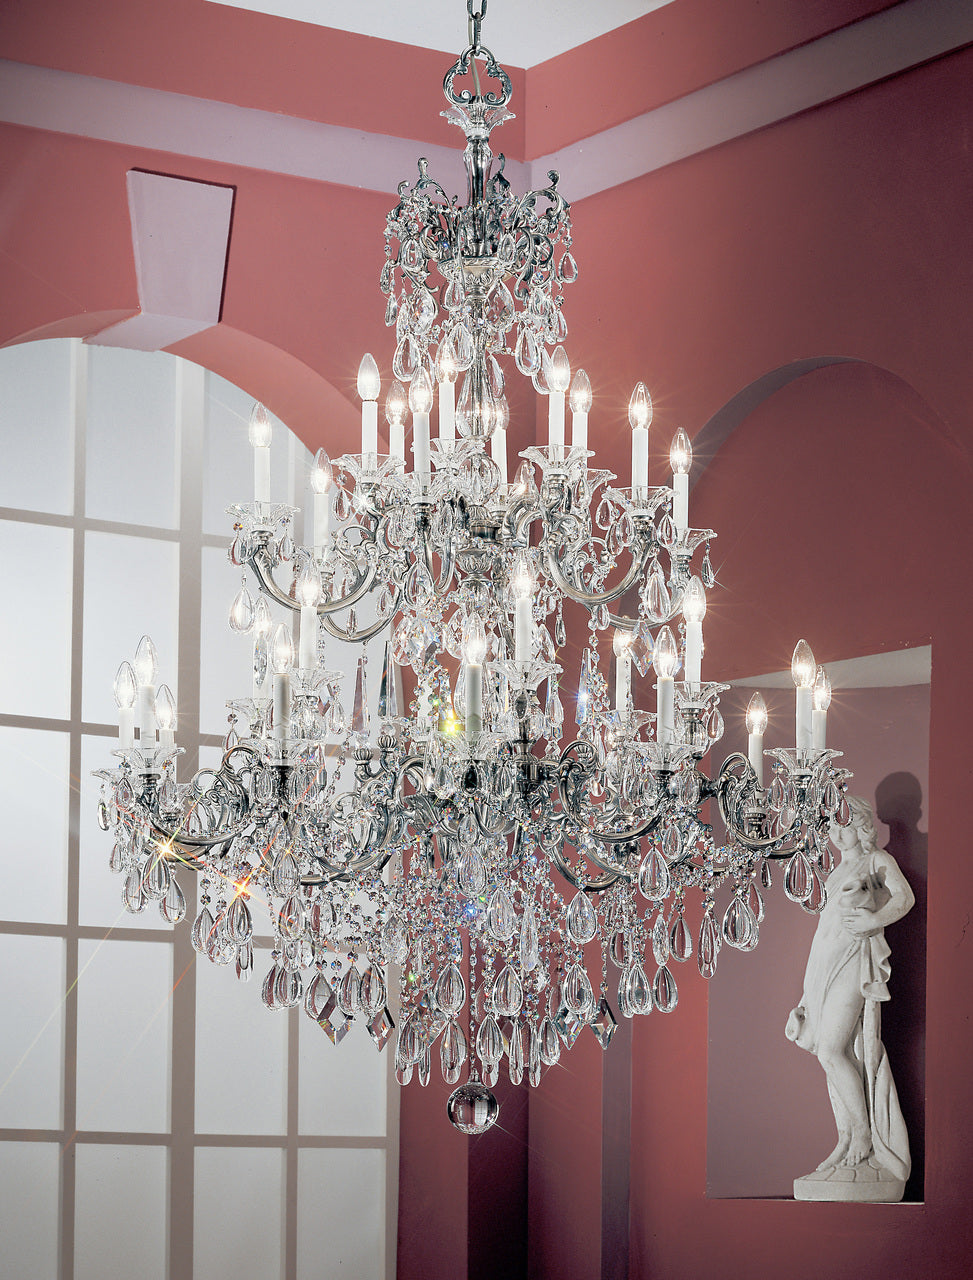 Classic Lighting 57030 MS S Via Venteo Crystal Chandelier in Millennium Silver (Imported from Spain)